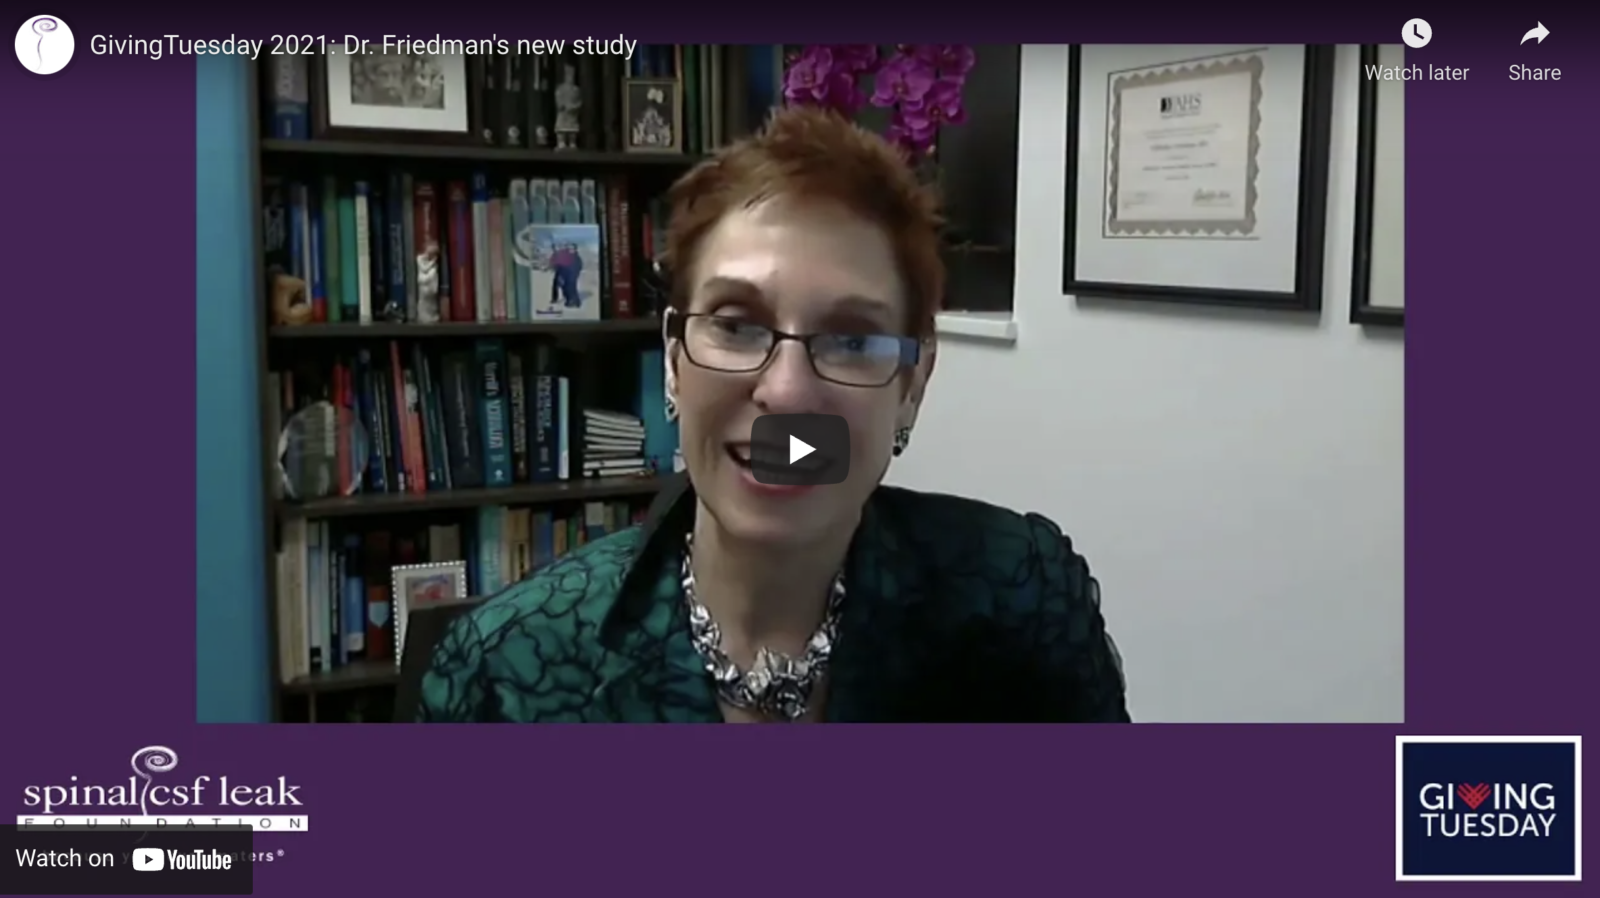 Preview of a YouTube video interview with Dr. Friedman about her new study